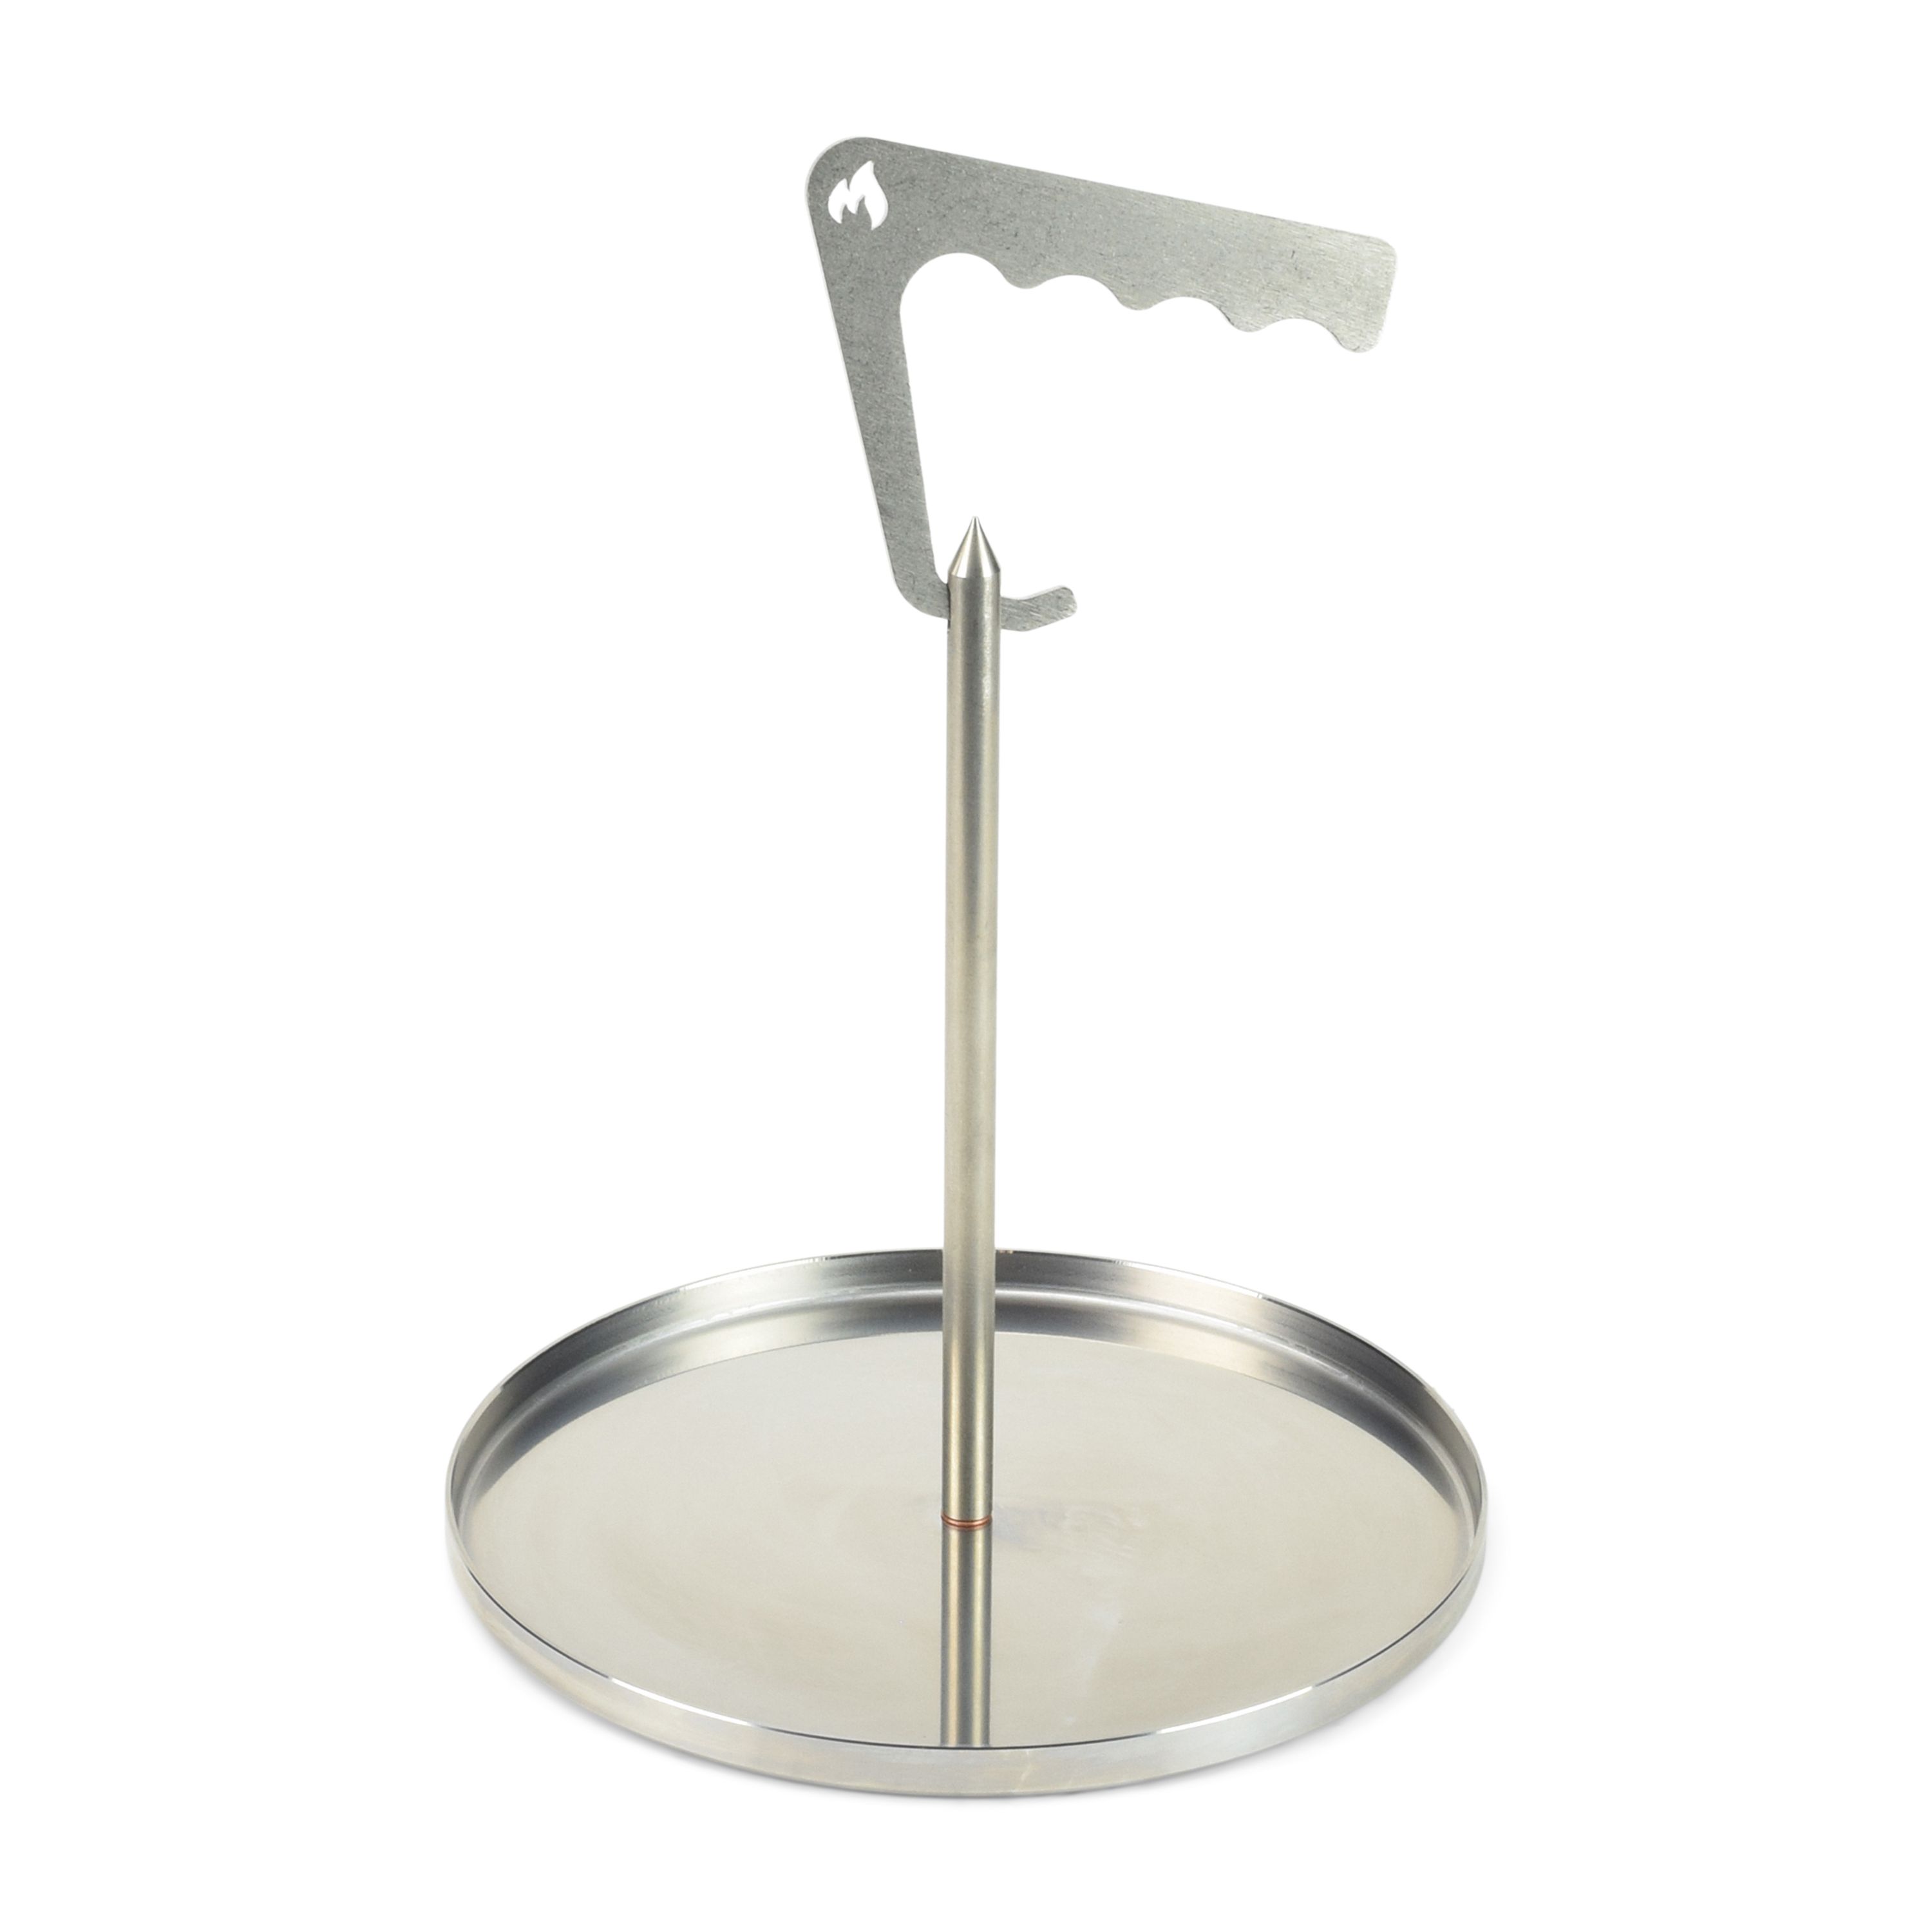 Stainless steel spit tower with tub